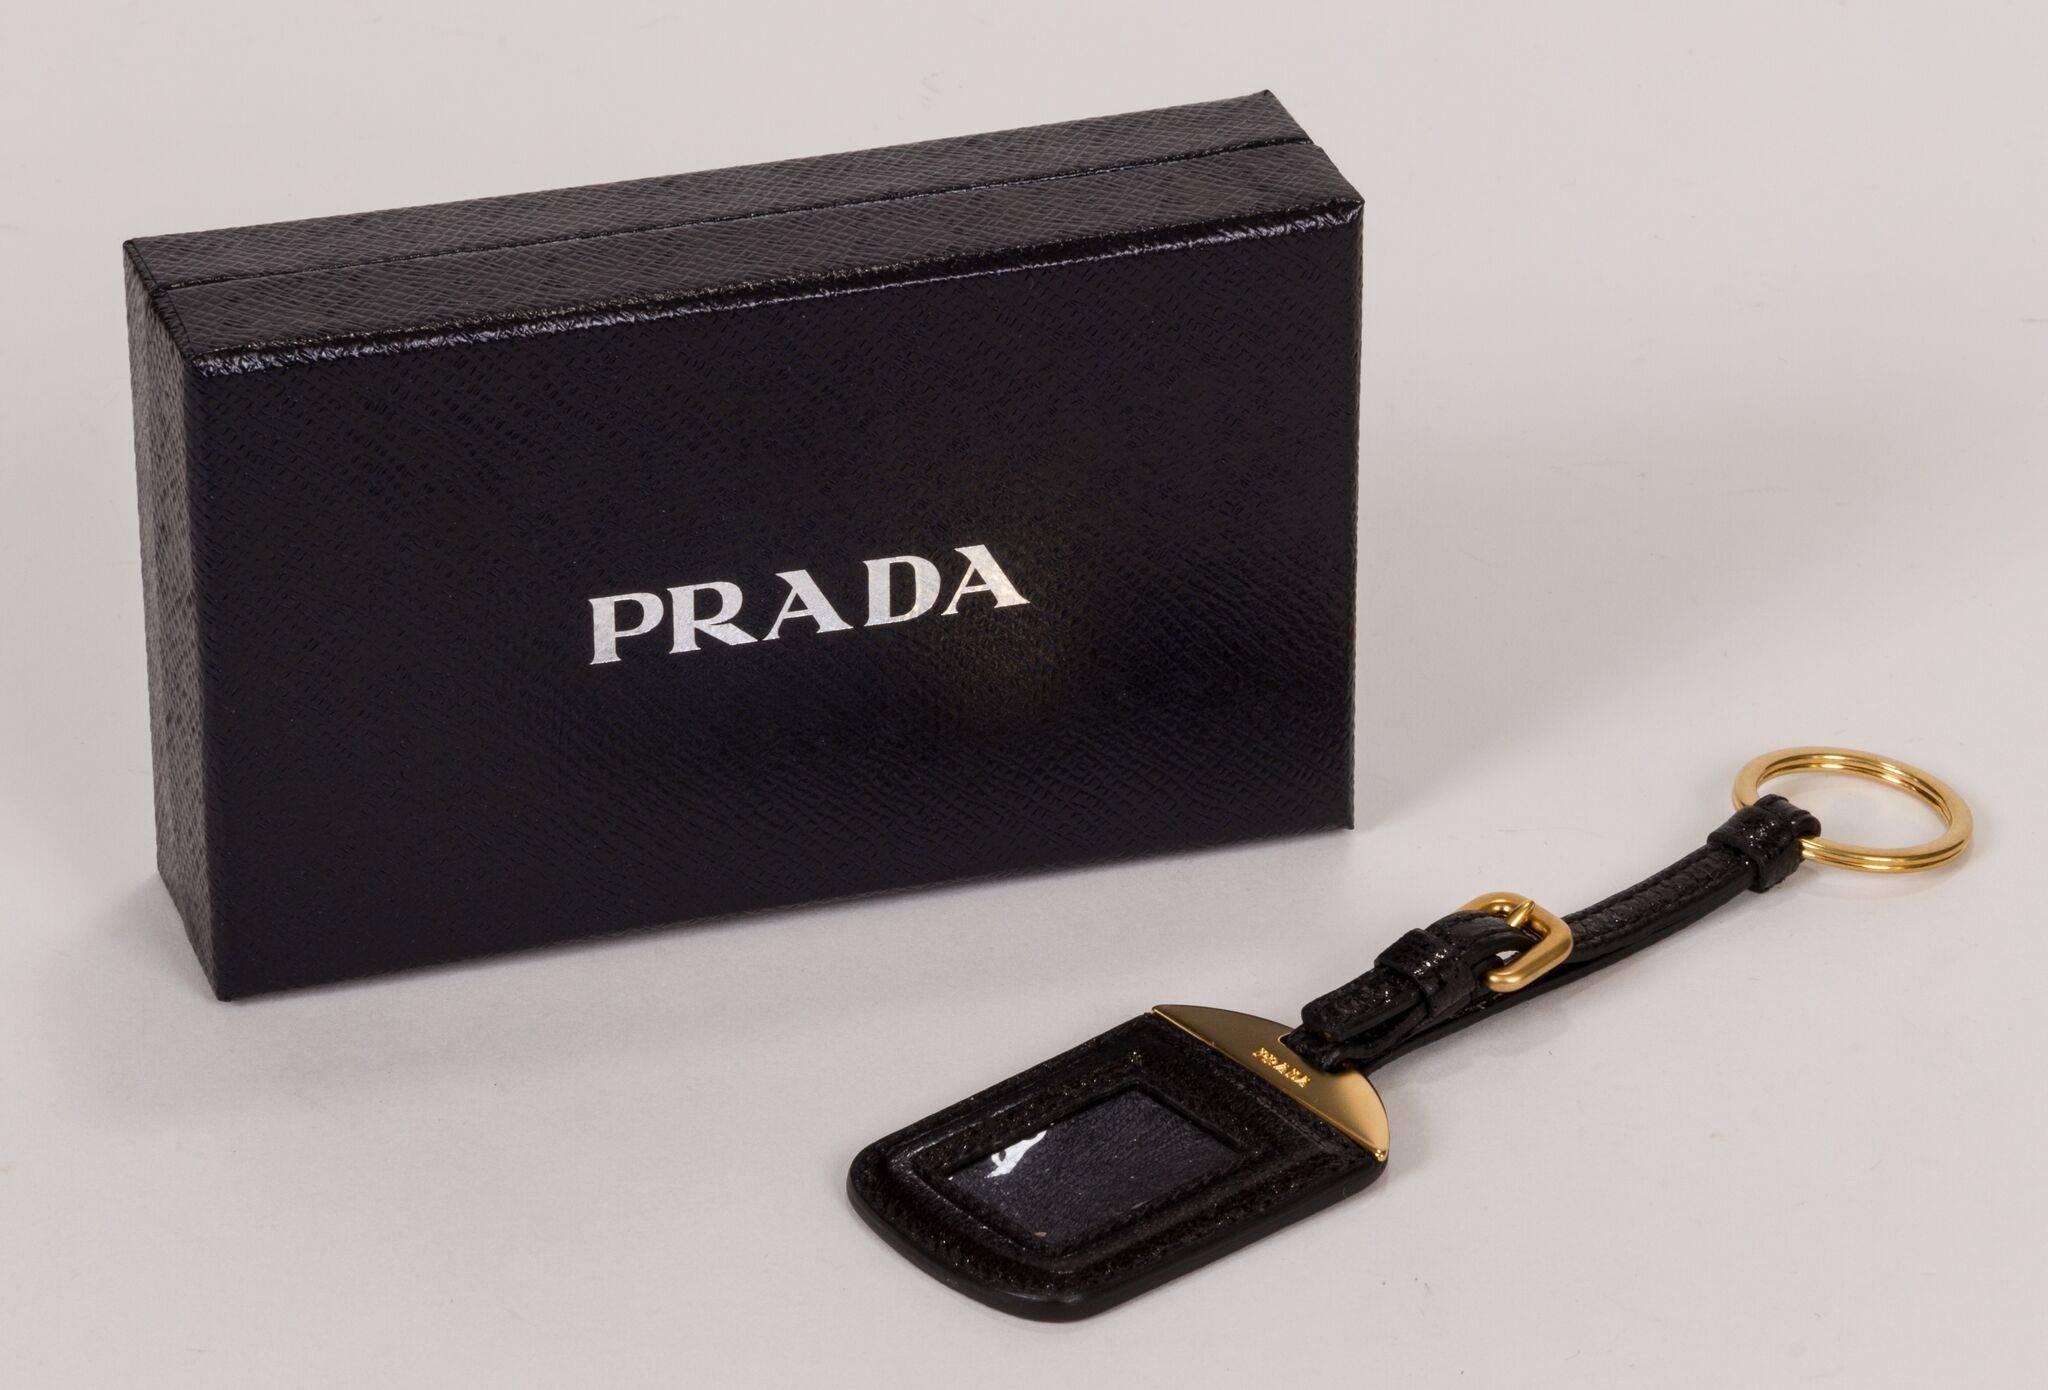 New 2014 Prada keychain and name tag holder. Black glossy leather and gold tone hardware. Comes with original box and tag.